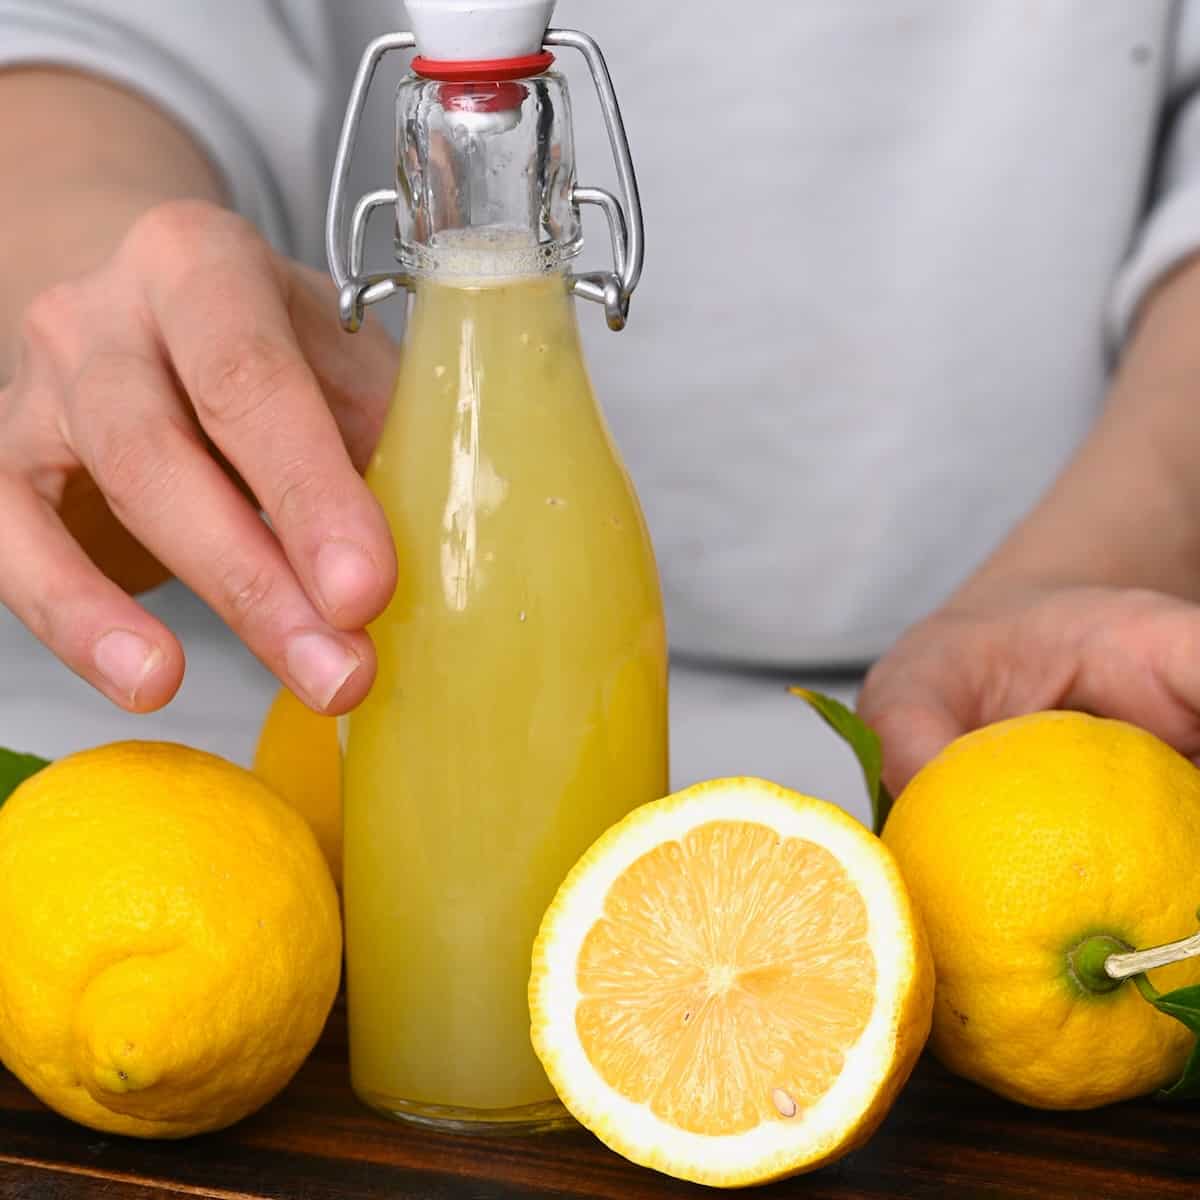 Hand holding a small bottle with lemon juice and thee lemons around it